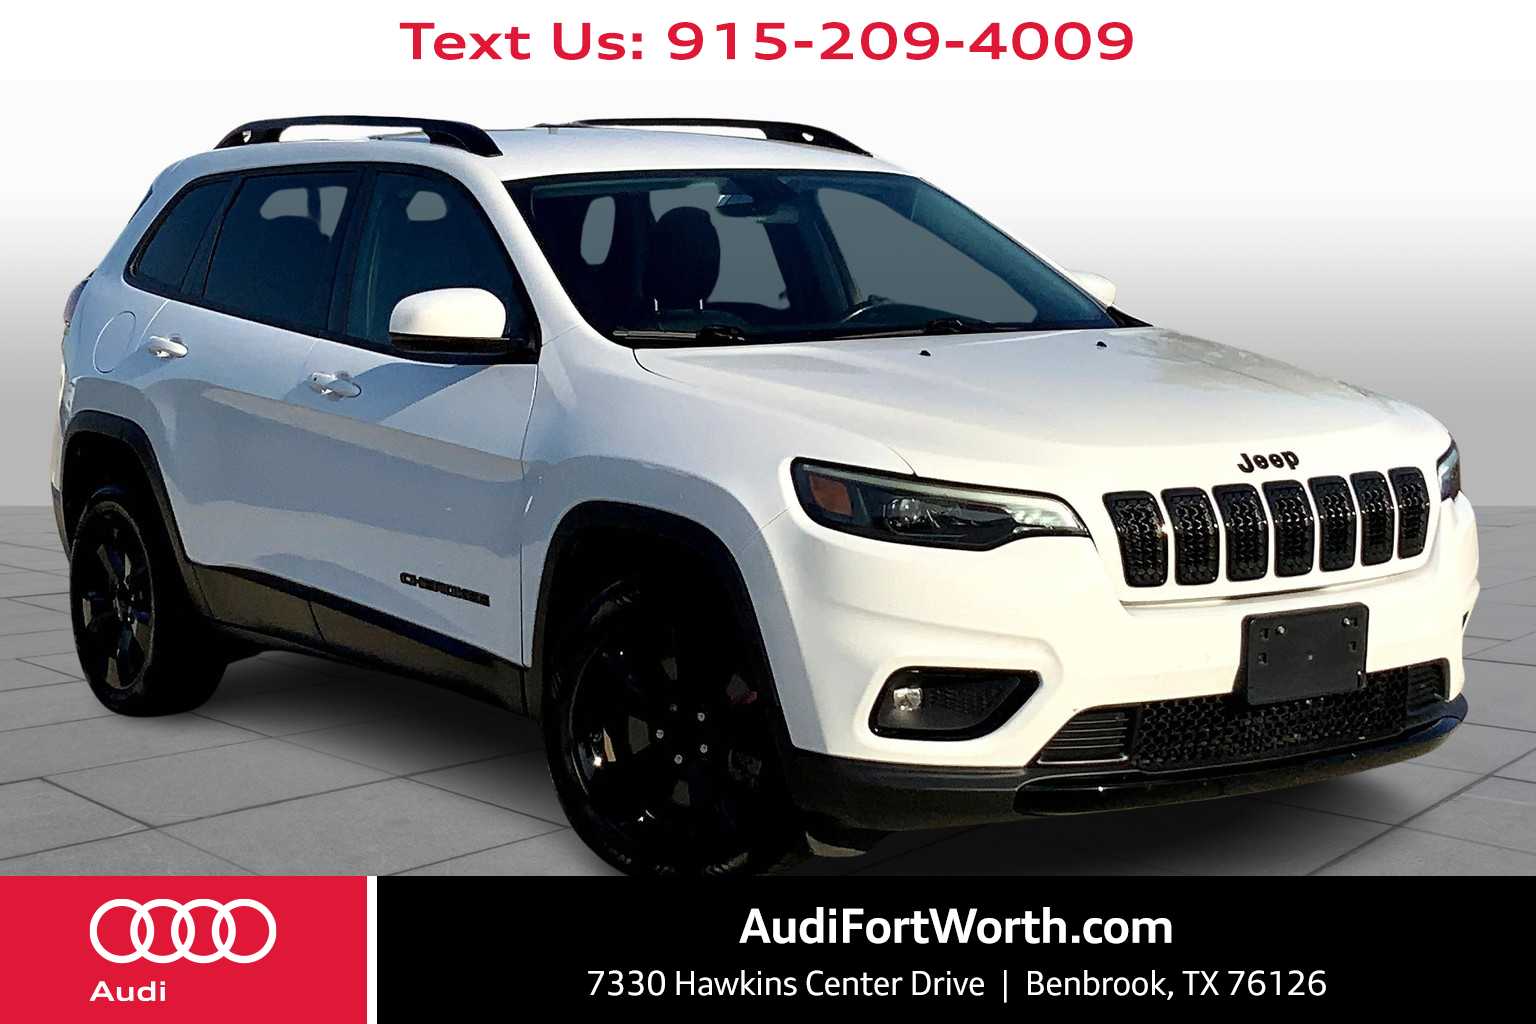 Used 2020 Jeep Cherokee Latitude Plus with VIN 1C4PJLLB0LD620418 for sale in Benbrook, TX